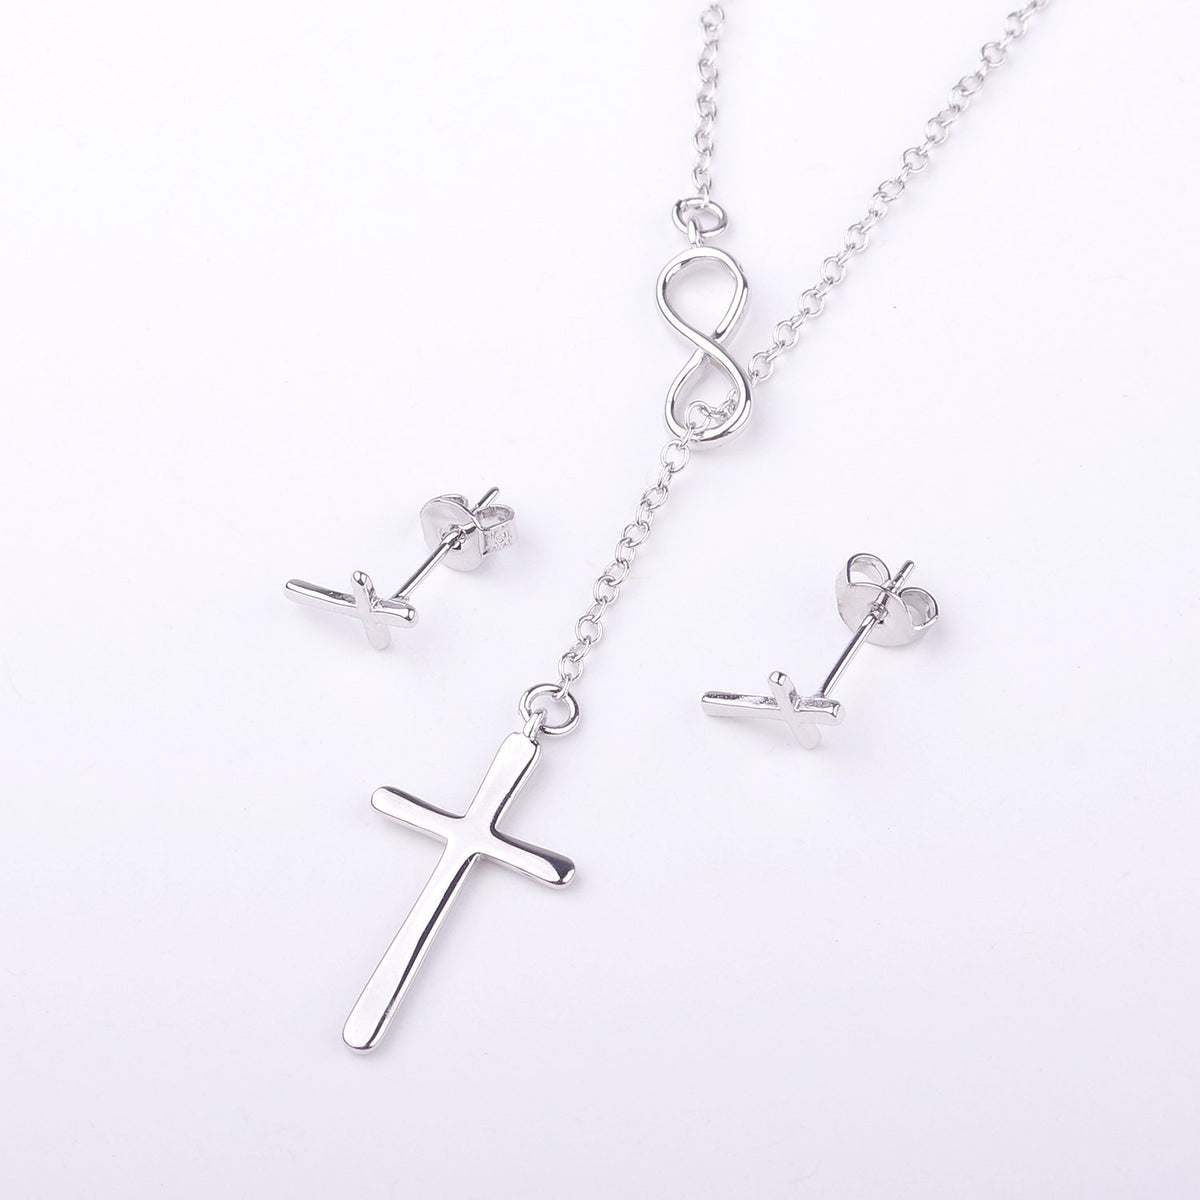 Christmas Gift for Mom Cross earring and Necklace Set Jewelry Set